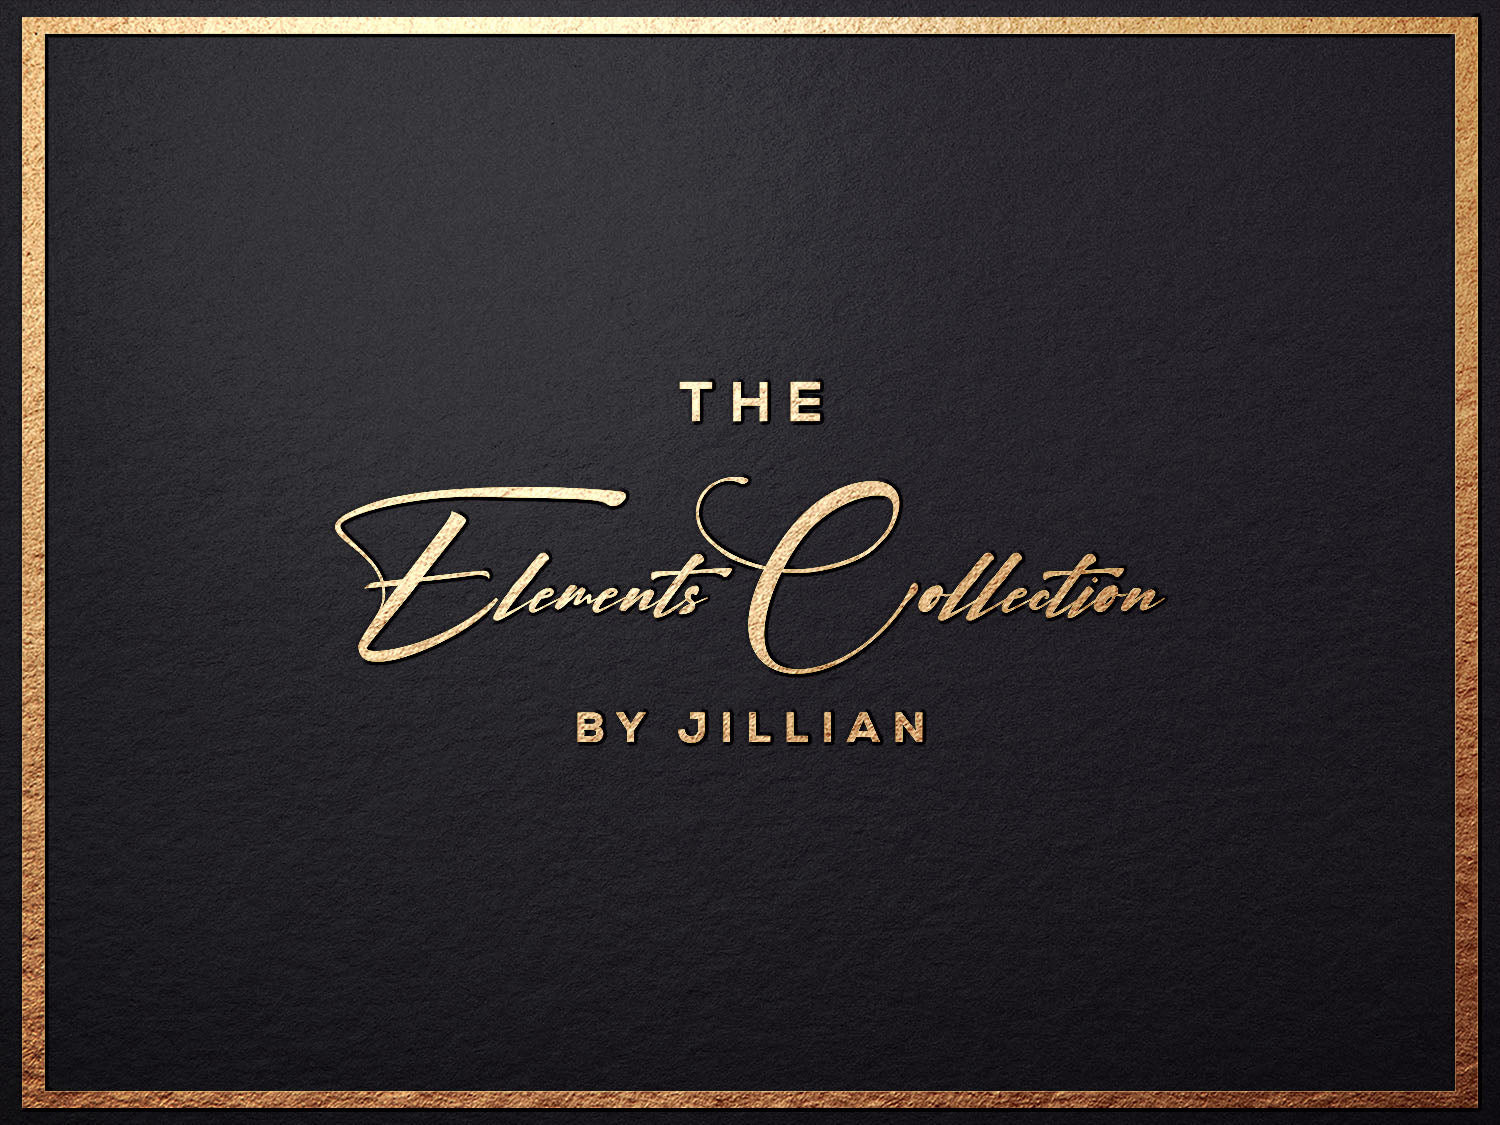 The Elements Collection by Jillian